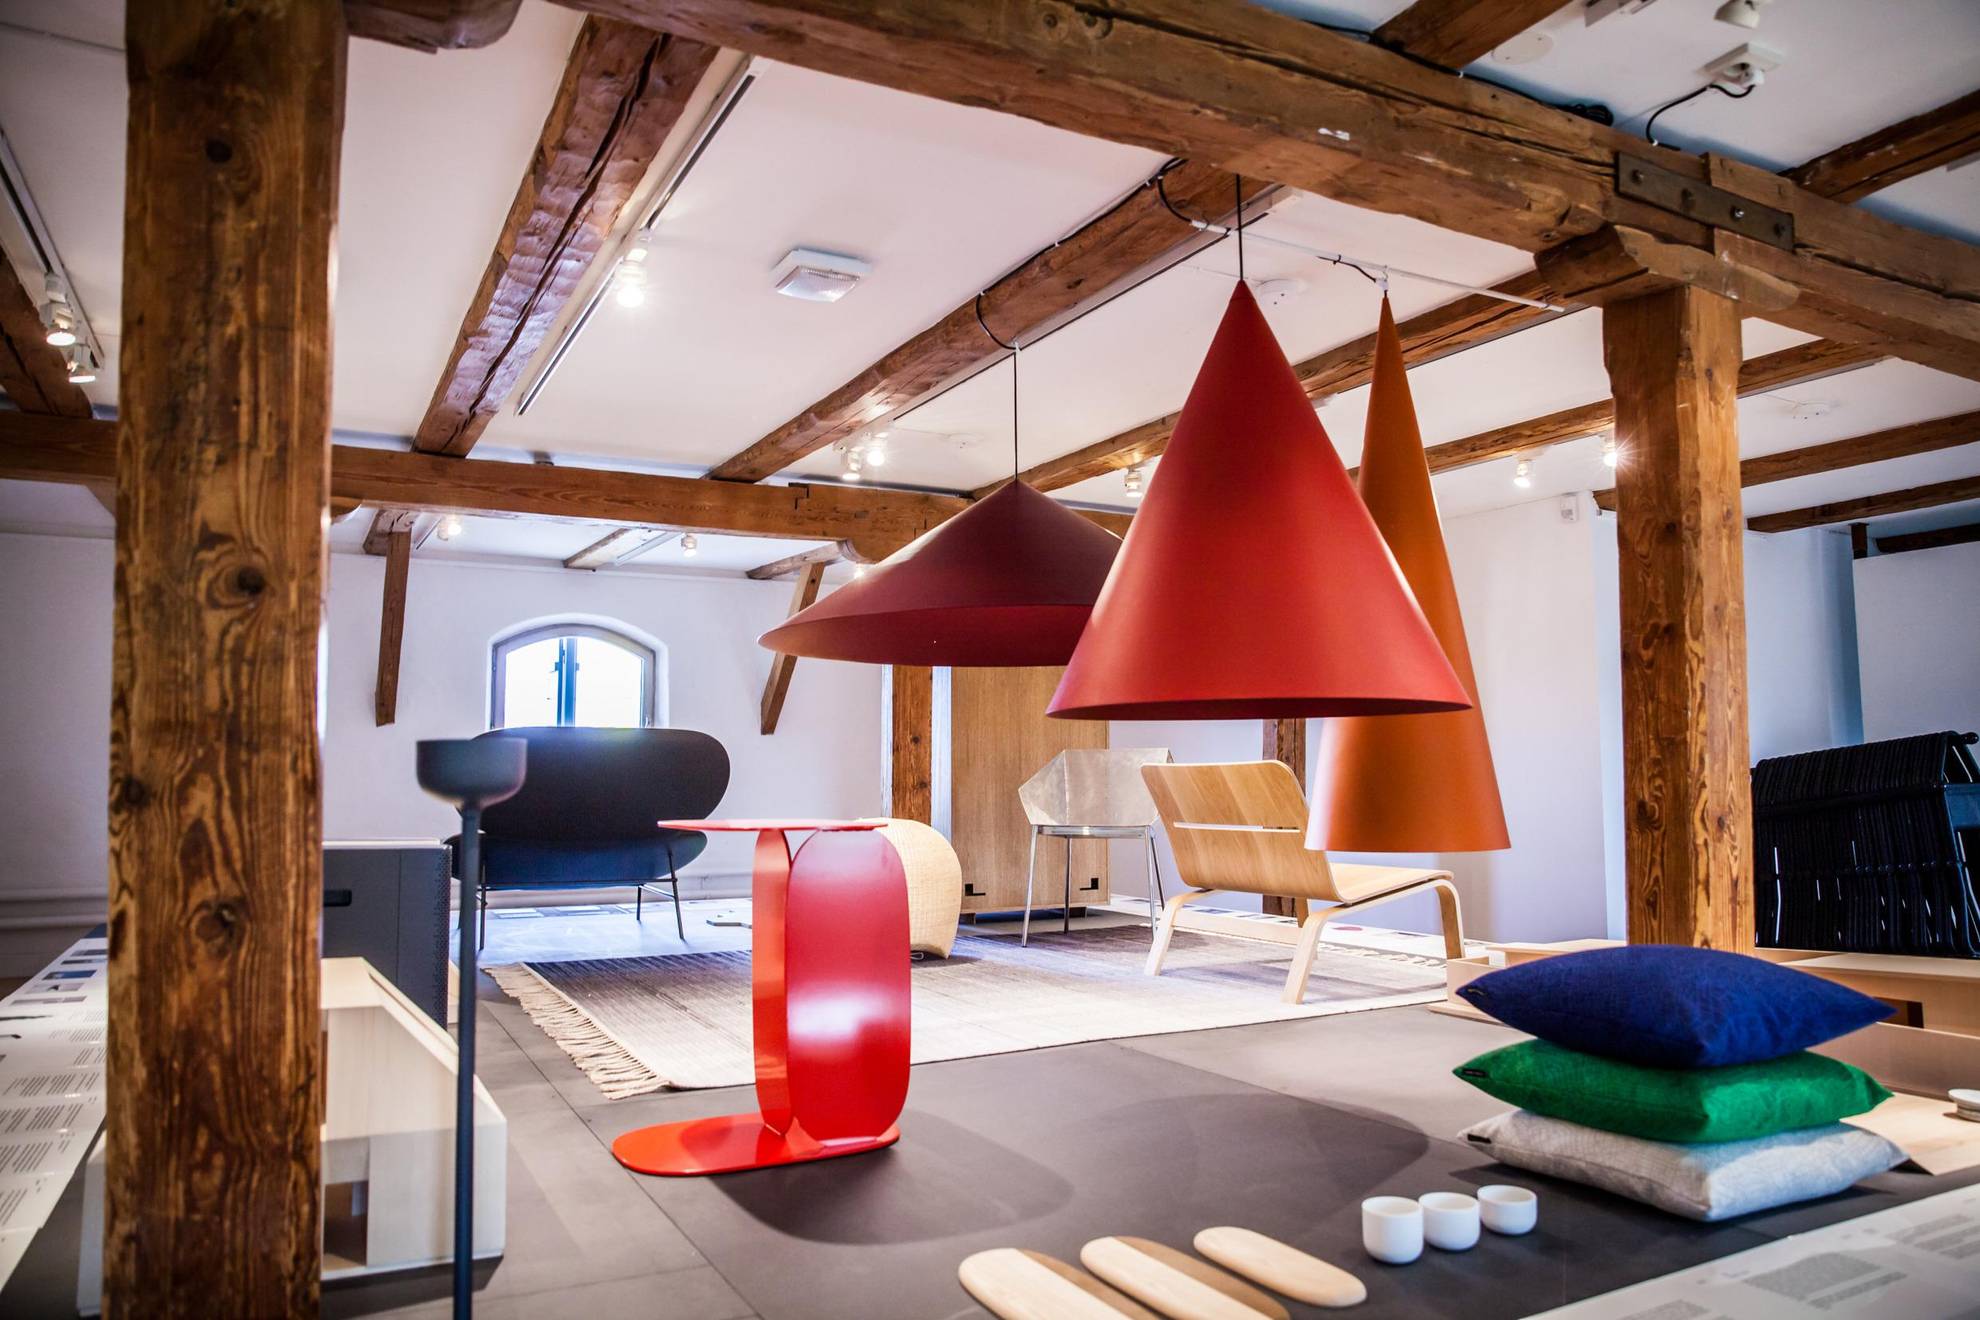 An attic room with wooden beams. Colourful design objects in the room, such as lamps, chairs and pillows.